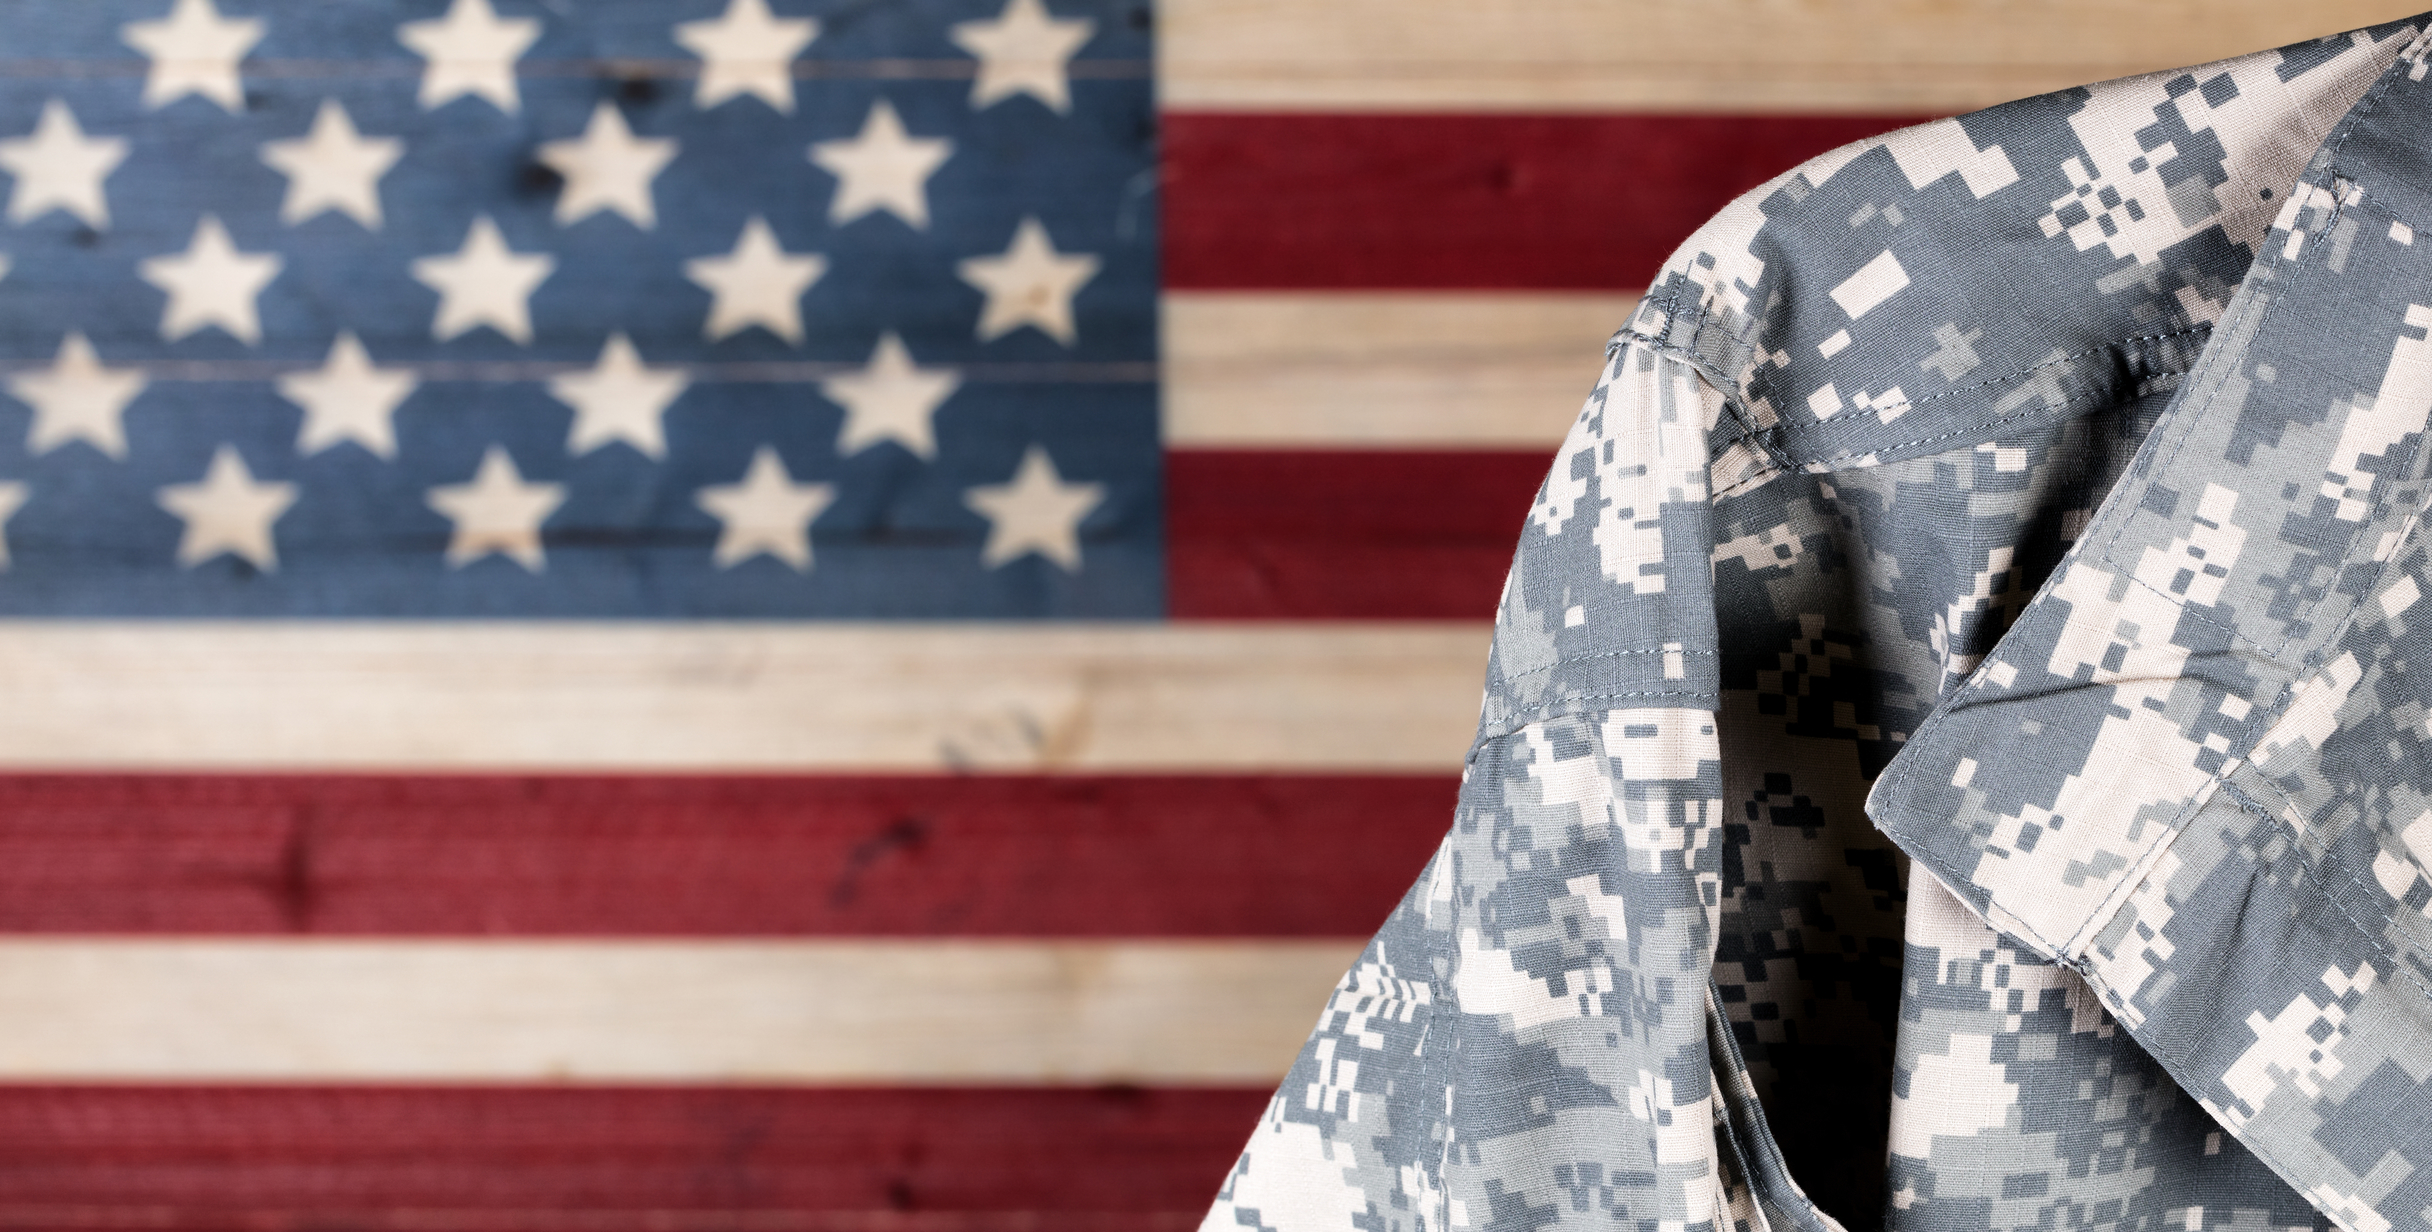 90+ great deals and discounts for military members and veterans